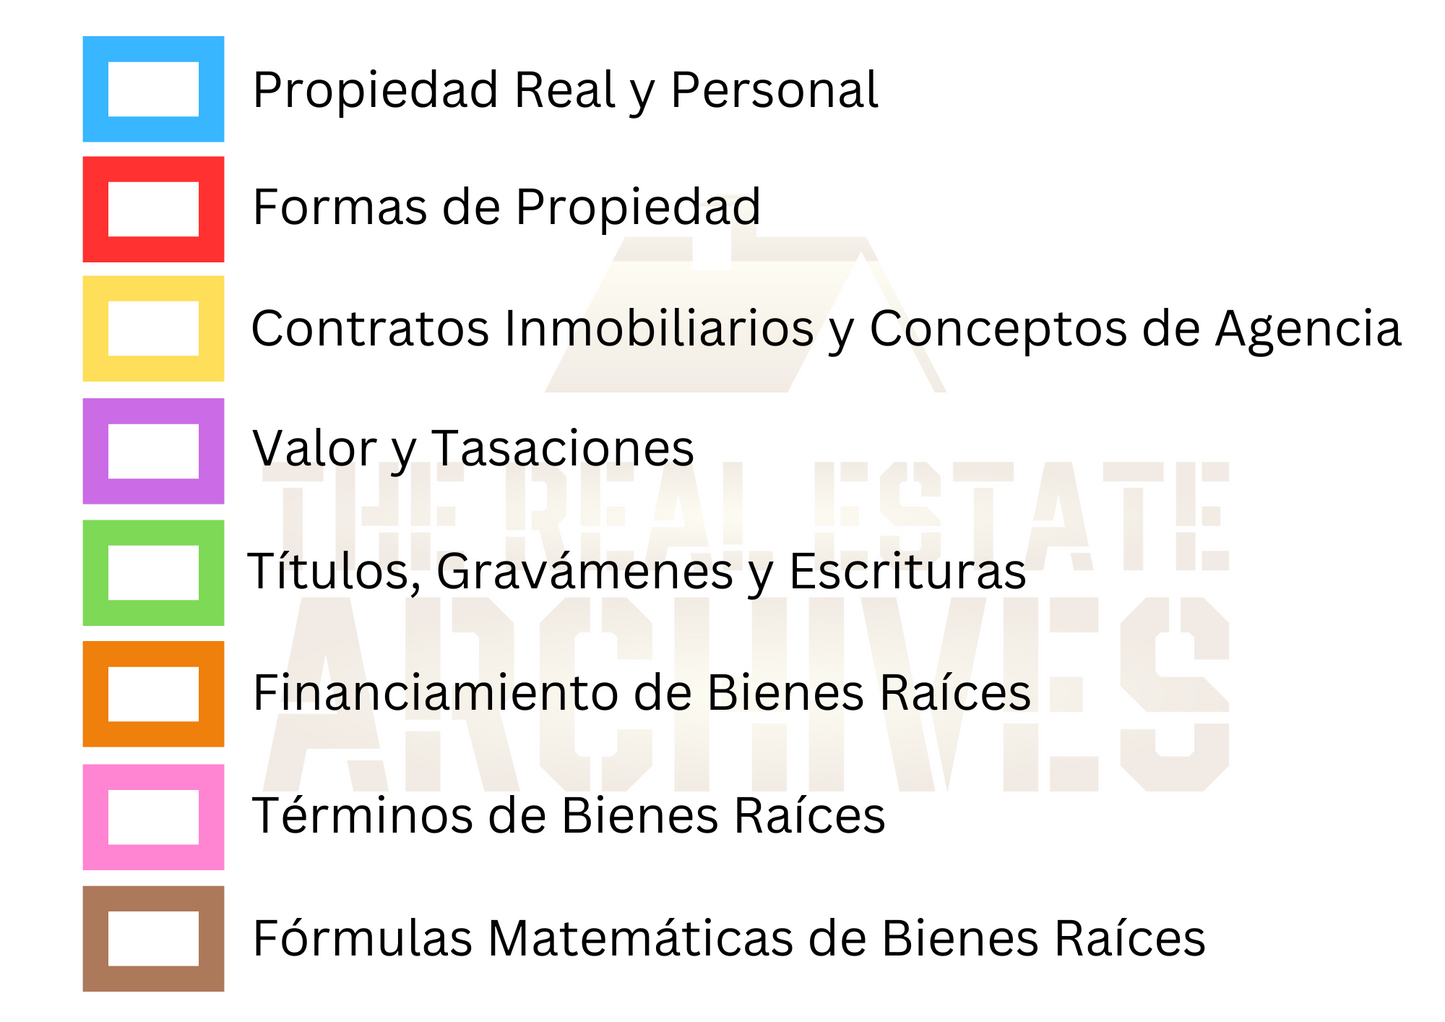 BUNDLE DEAL: National Real Estate Exam Flashcards & Practice Questions (Spanish)